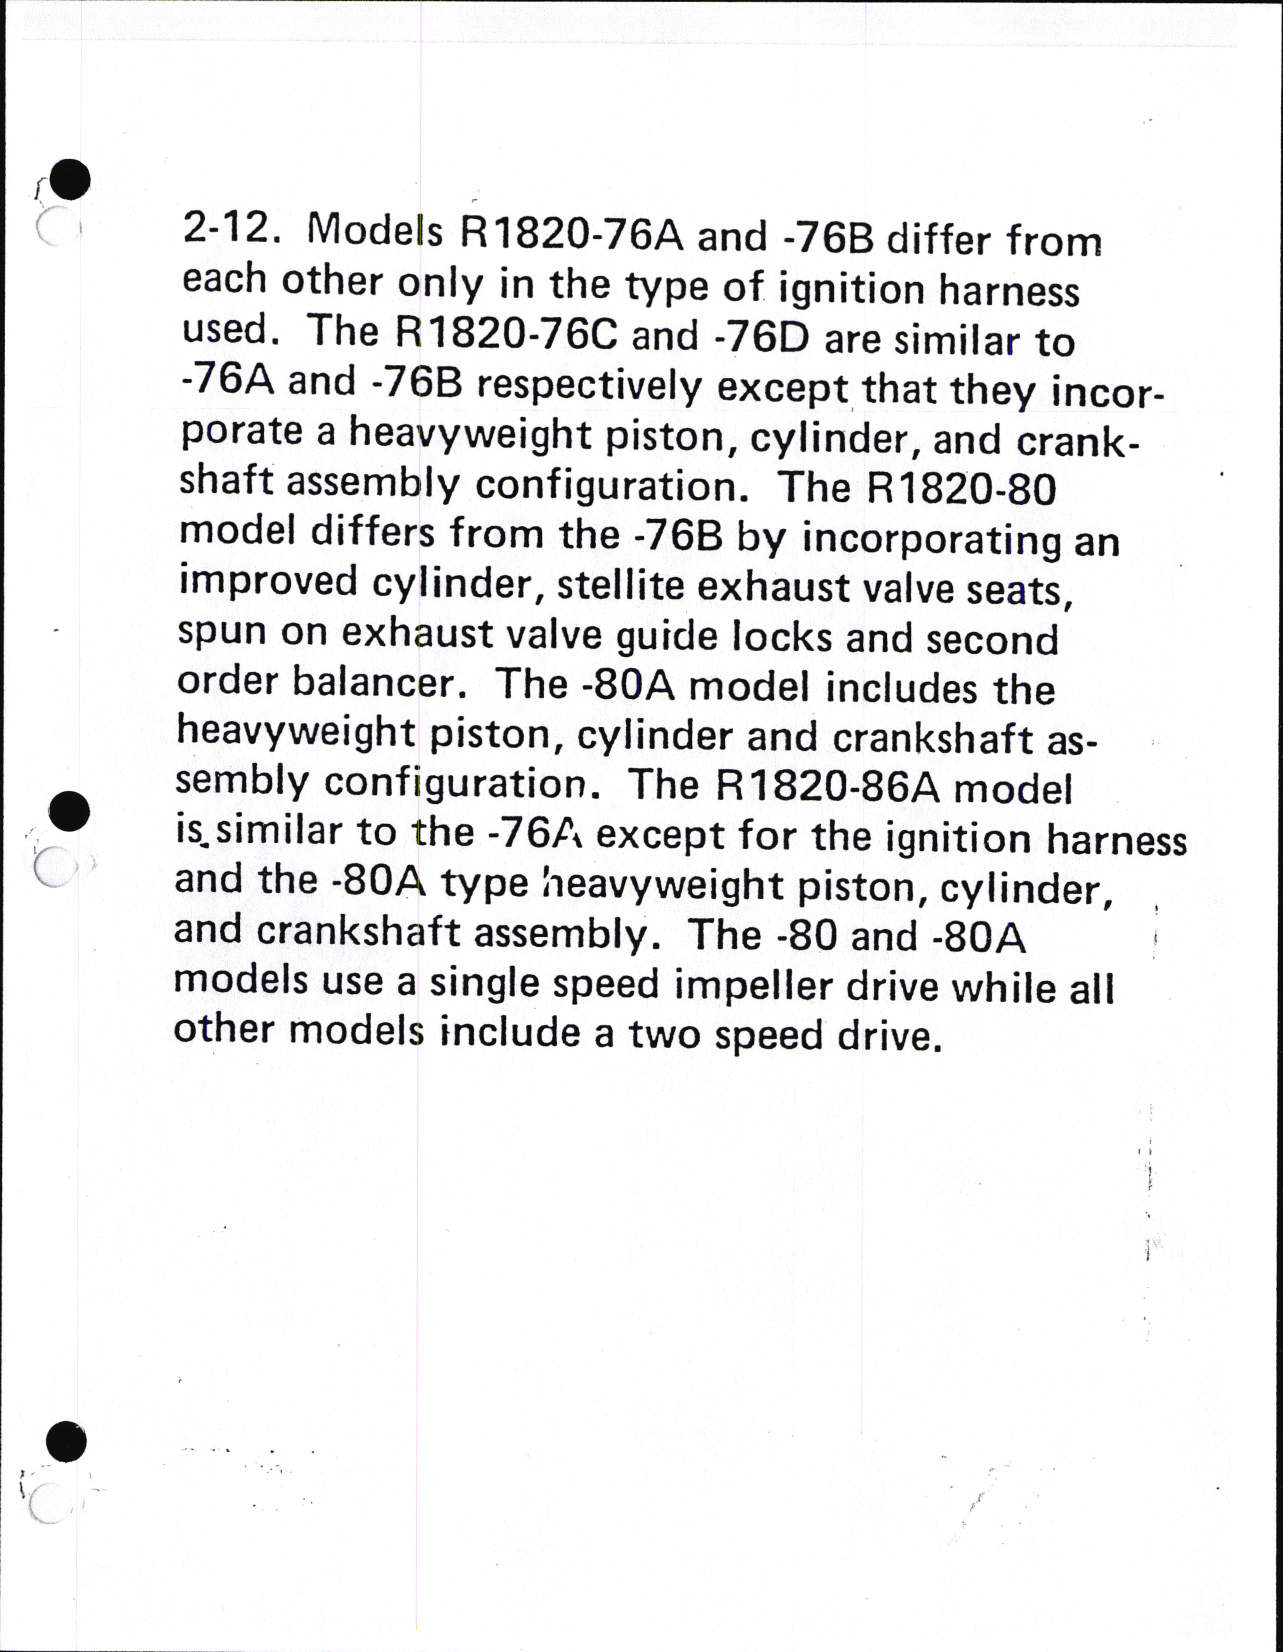 Sample page  3 from AirCorps Library document: Illustrated Parts Breakdown Tech Manual, R1820